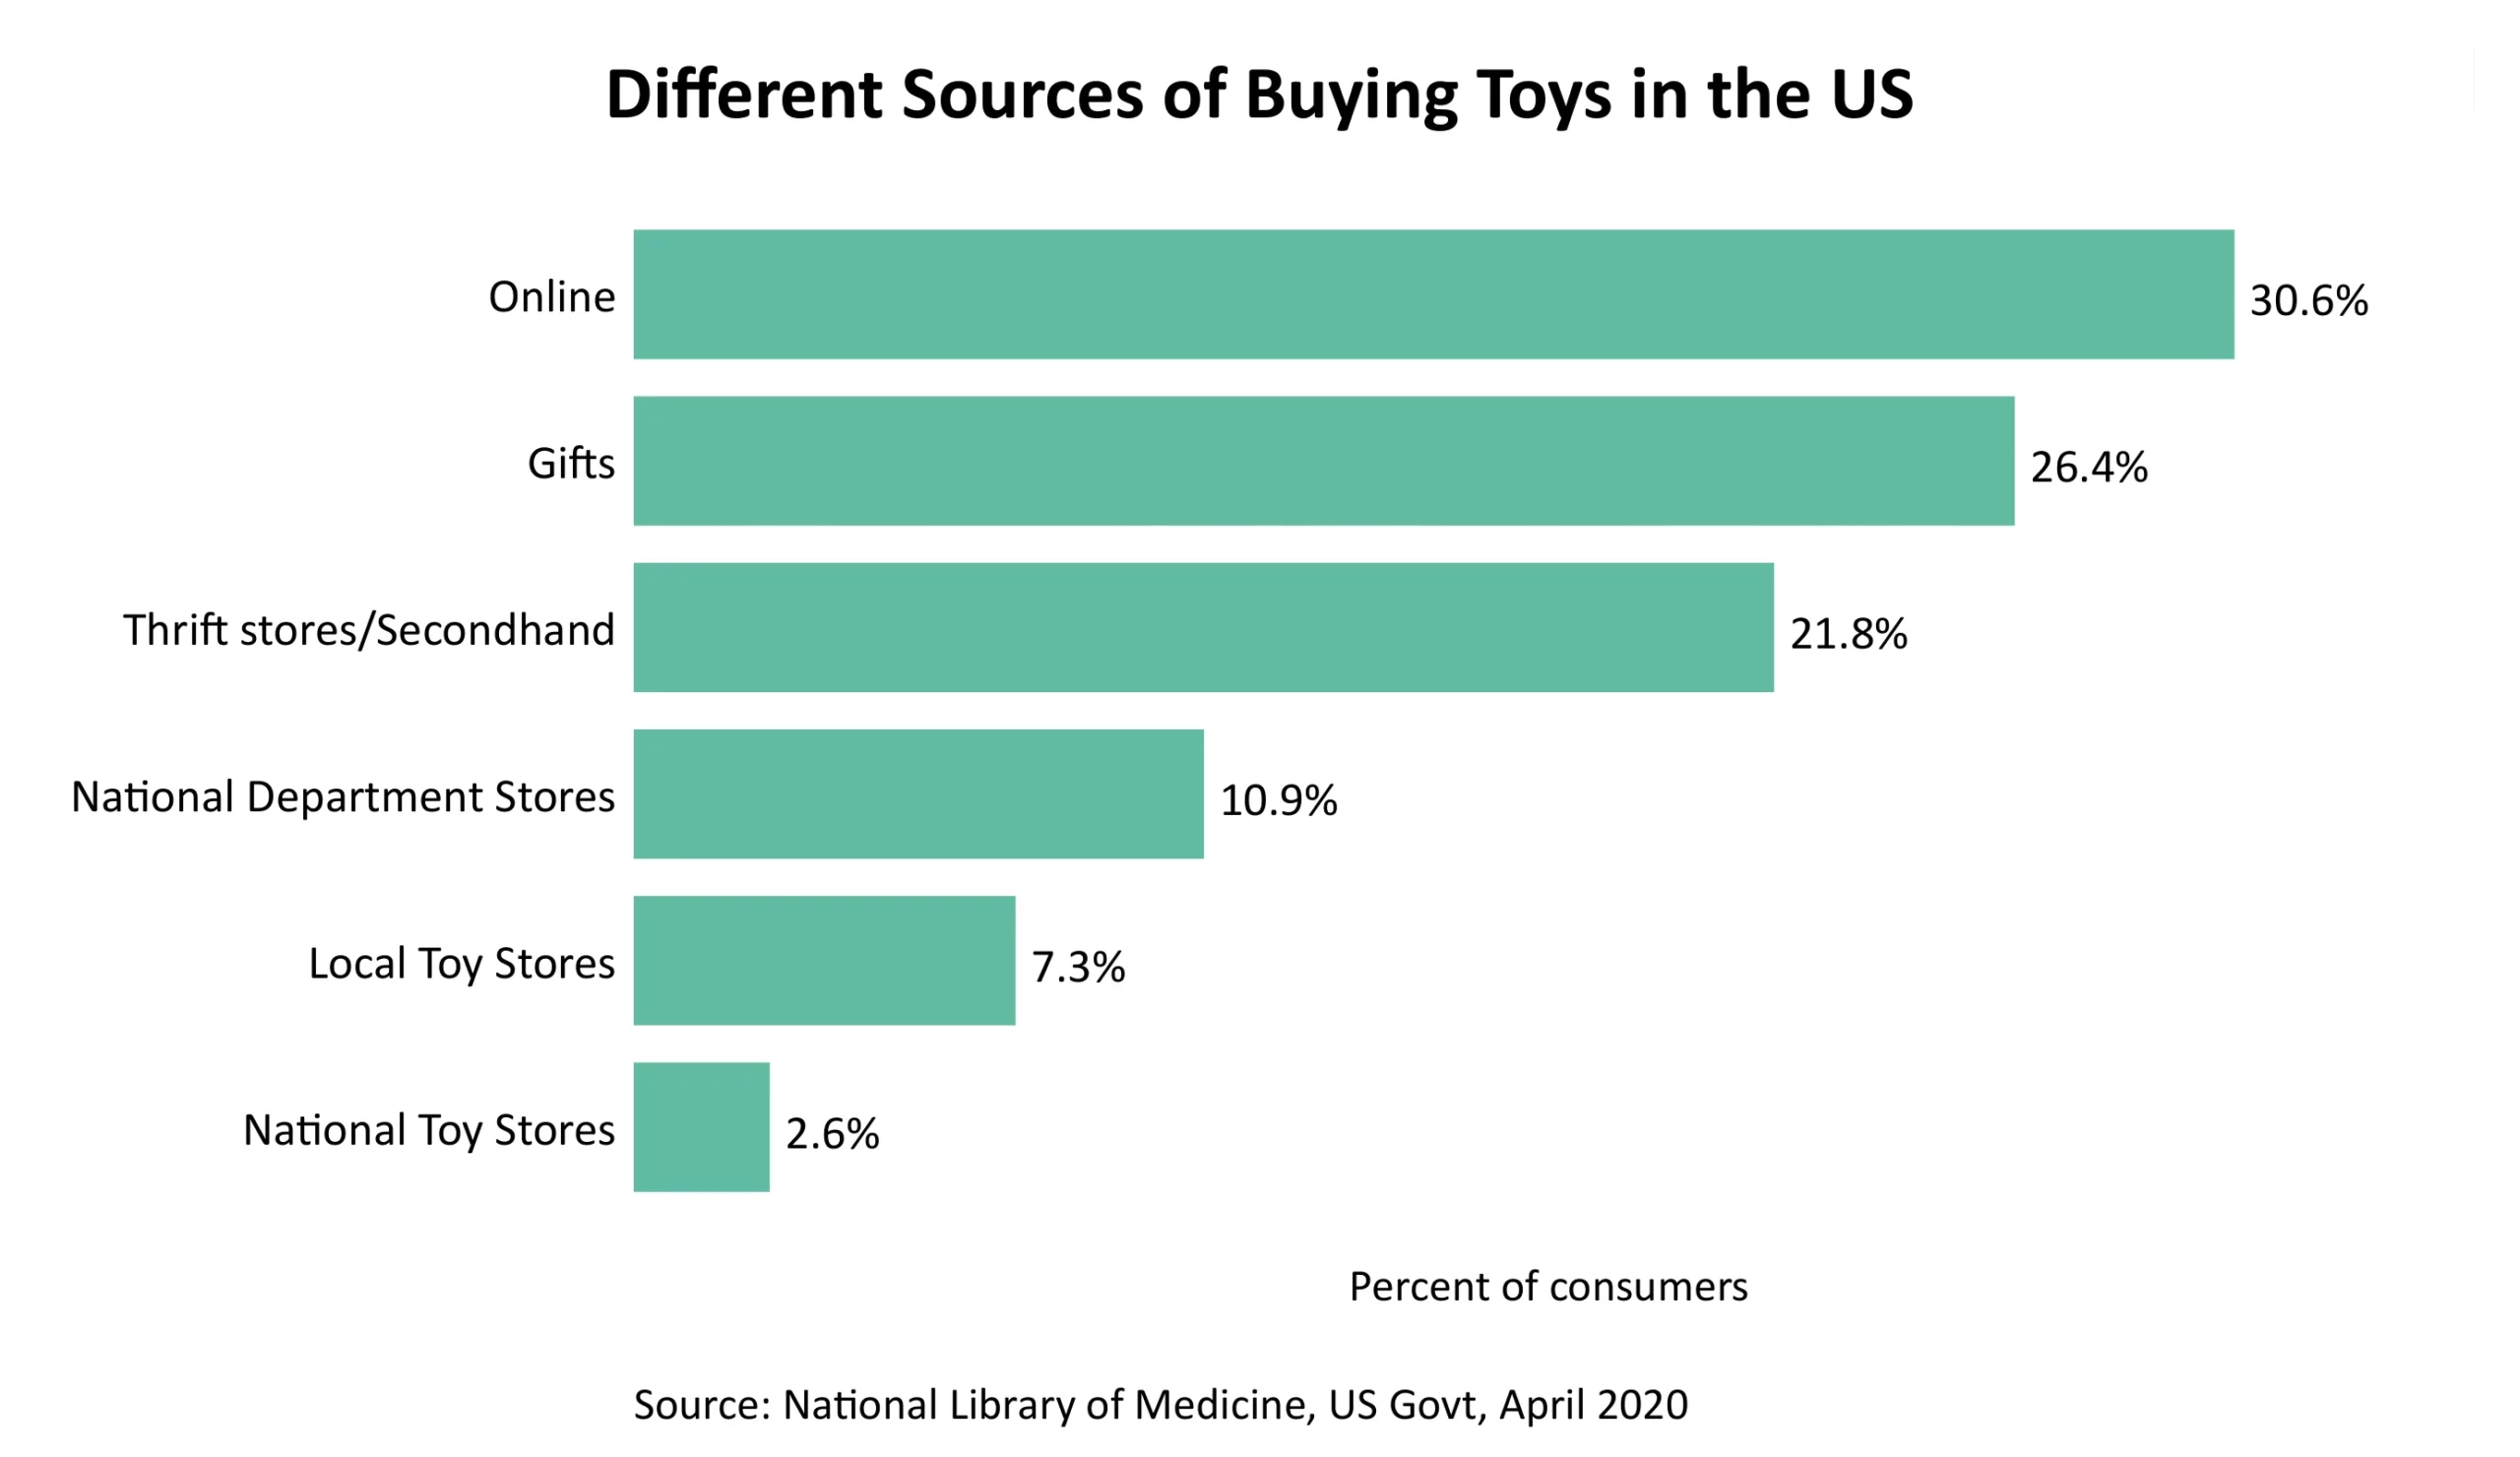 Different Sources of Buying Toys in the US as on April 2020